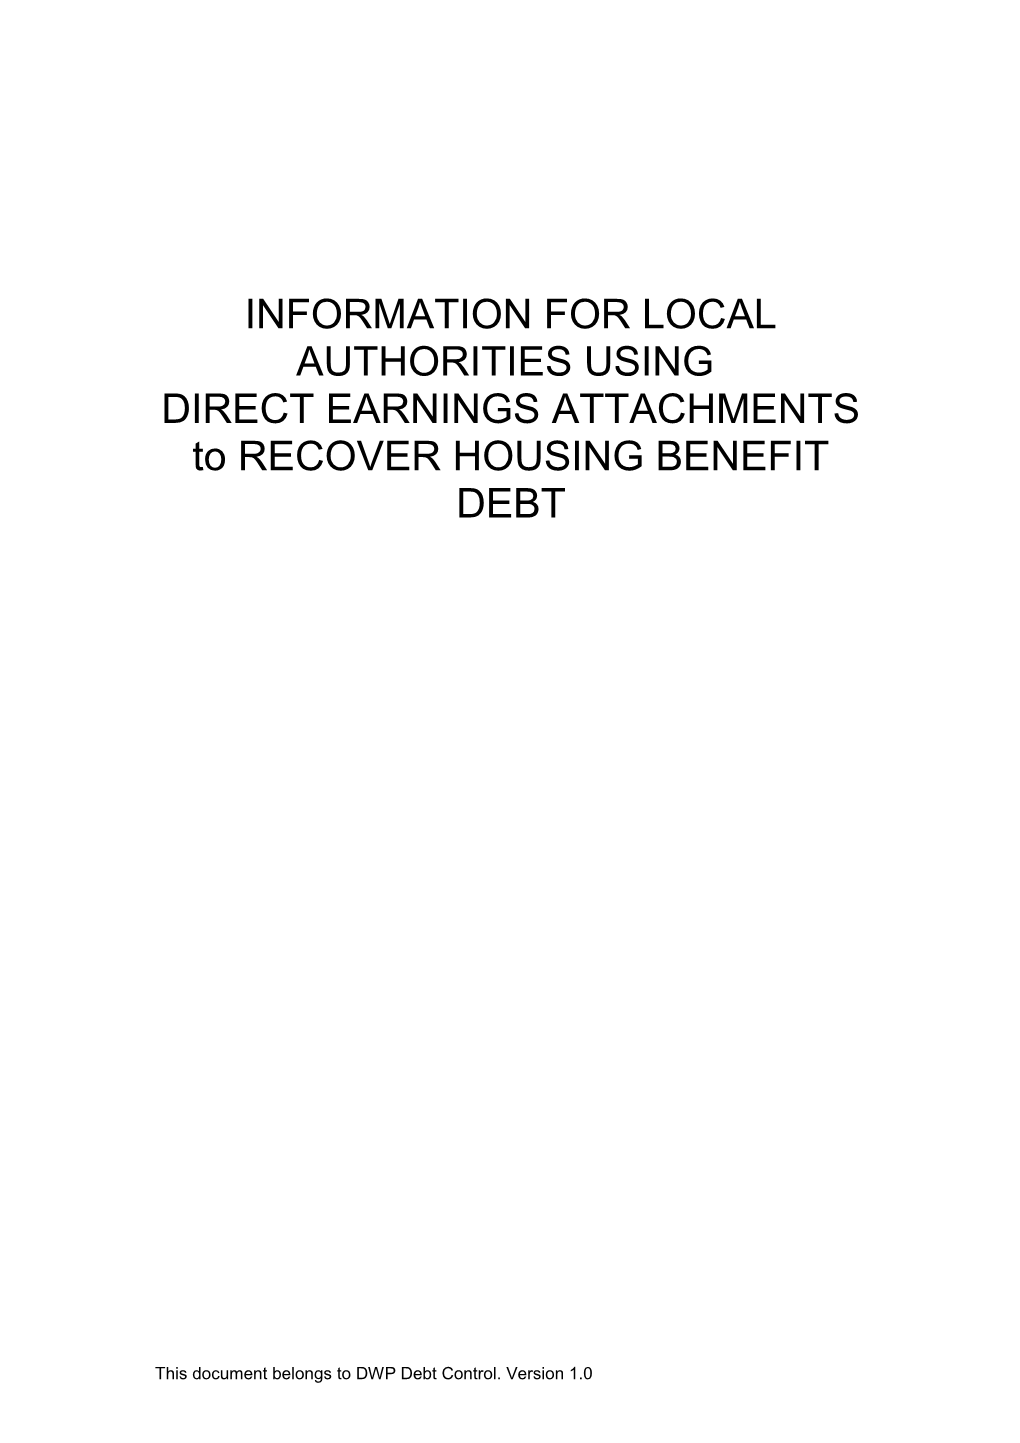 INFORMATION for LOCAL AUTHORITIES USING DIRECT EARNINGS ATTACHMENTS (Deas) to PURSUE HOUSING